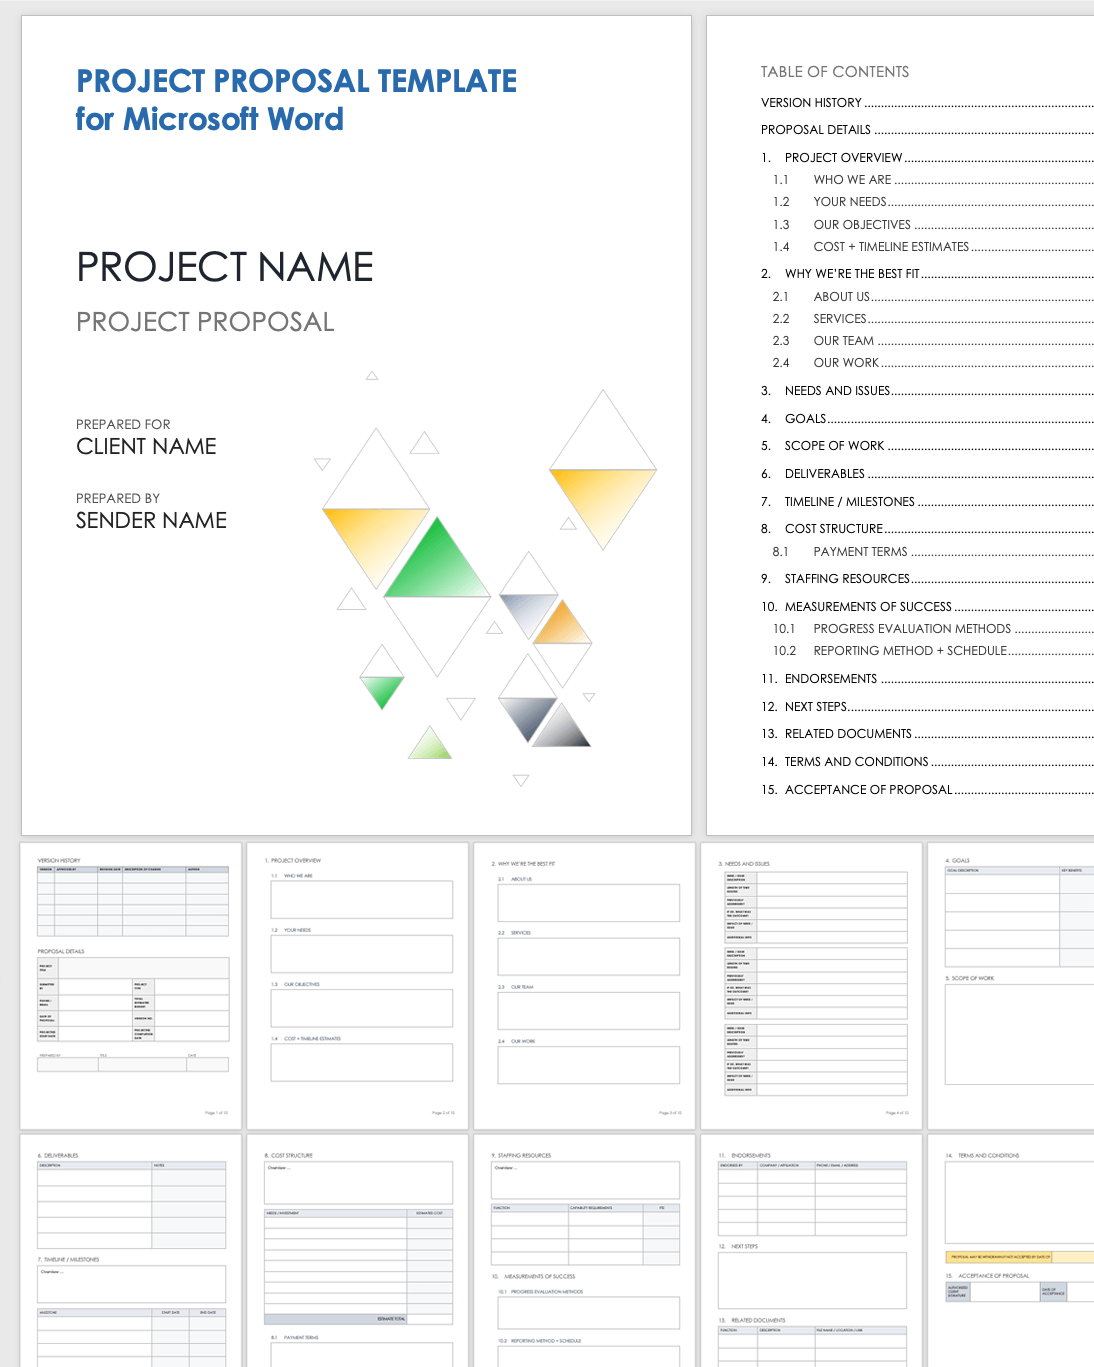 Project Proposal Template Microsoft Word